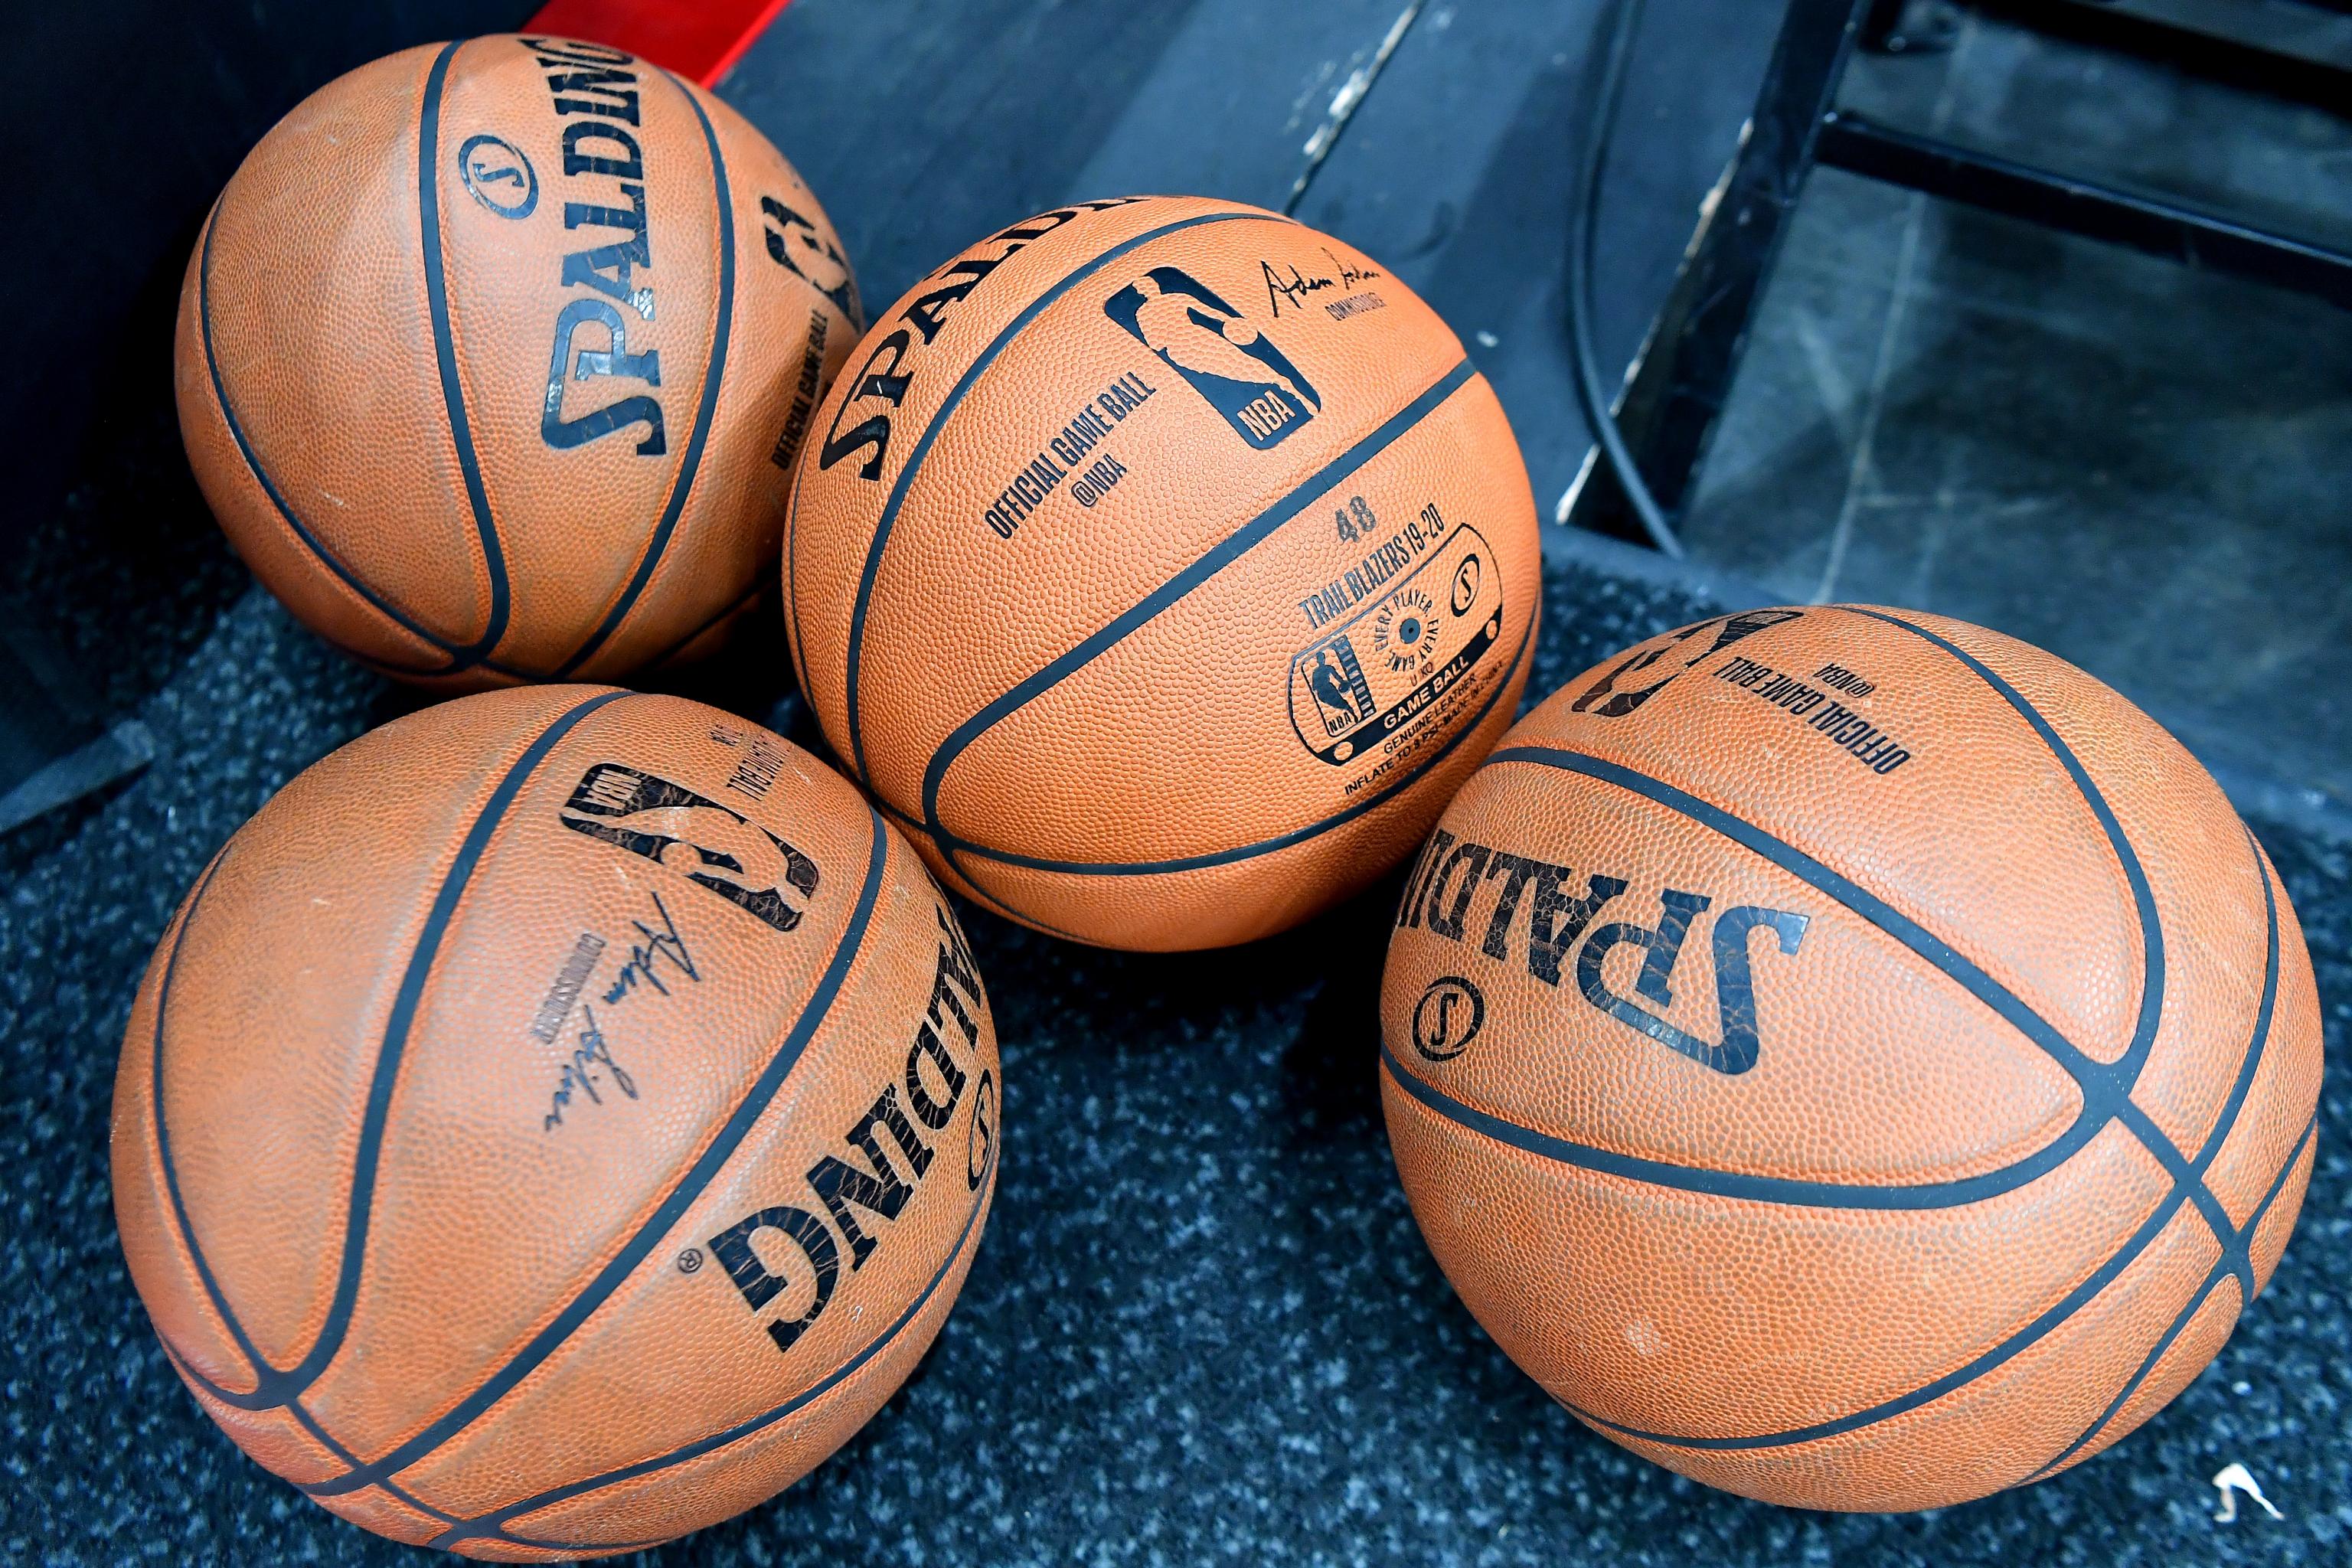 Nba Announces Revised 2019 20 Season Schedule For Return After Covid 19 Hiatus Bleacher Report Latest News Videos And Highlights